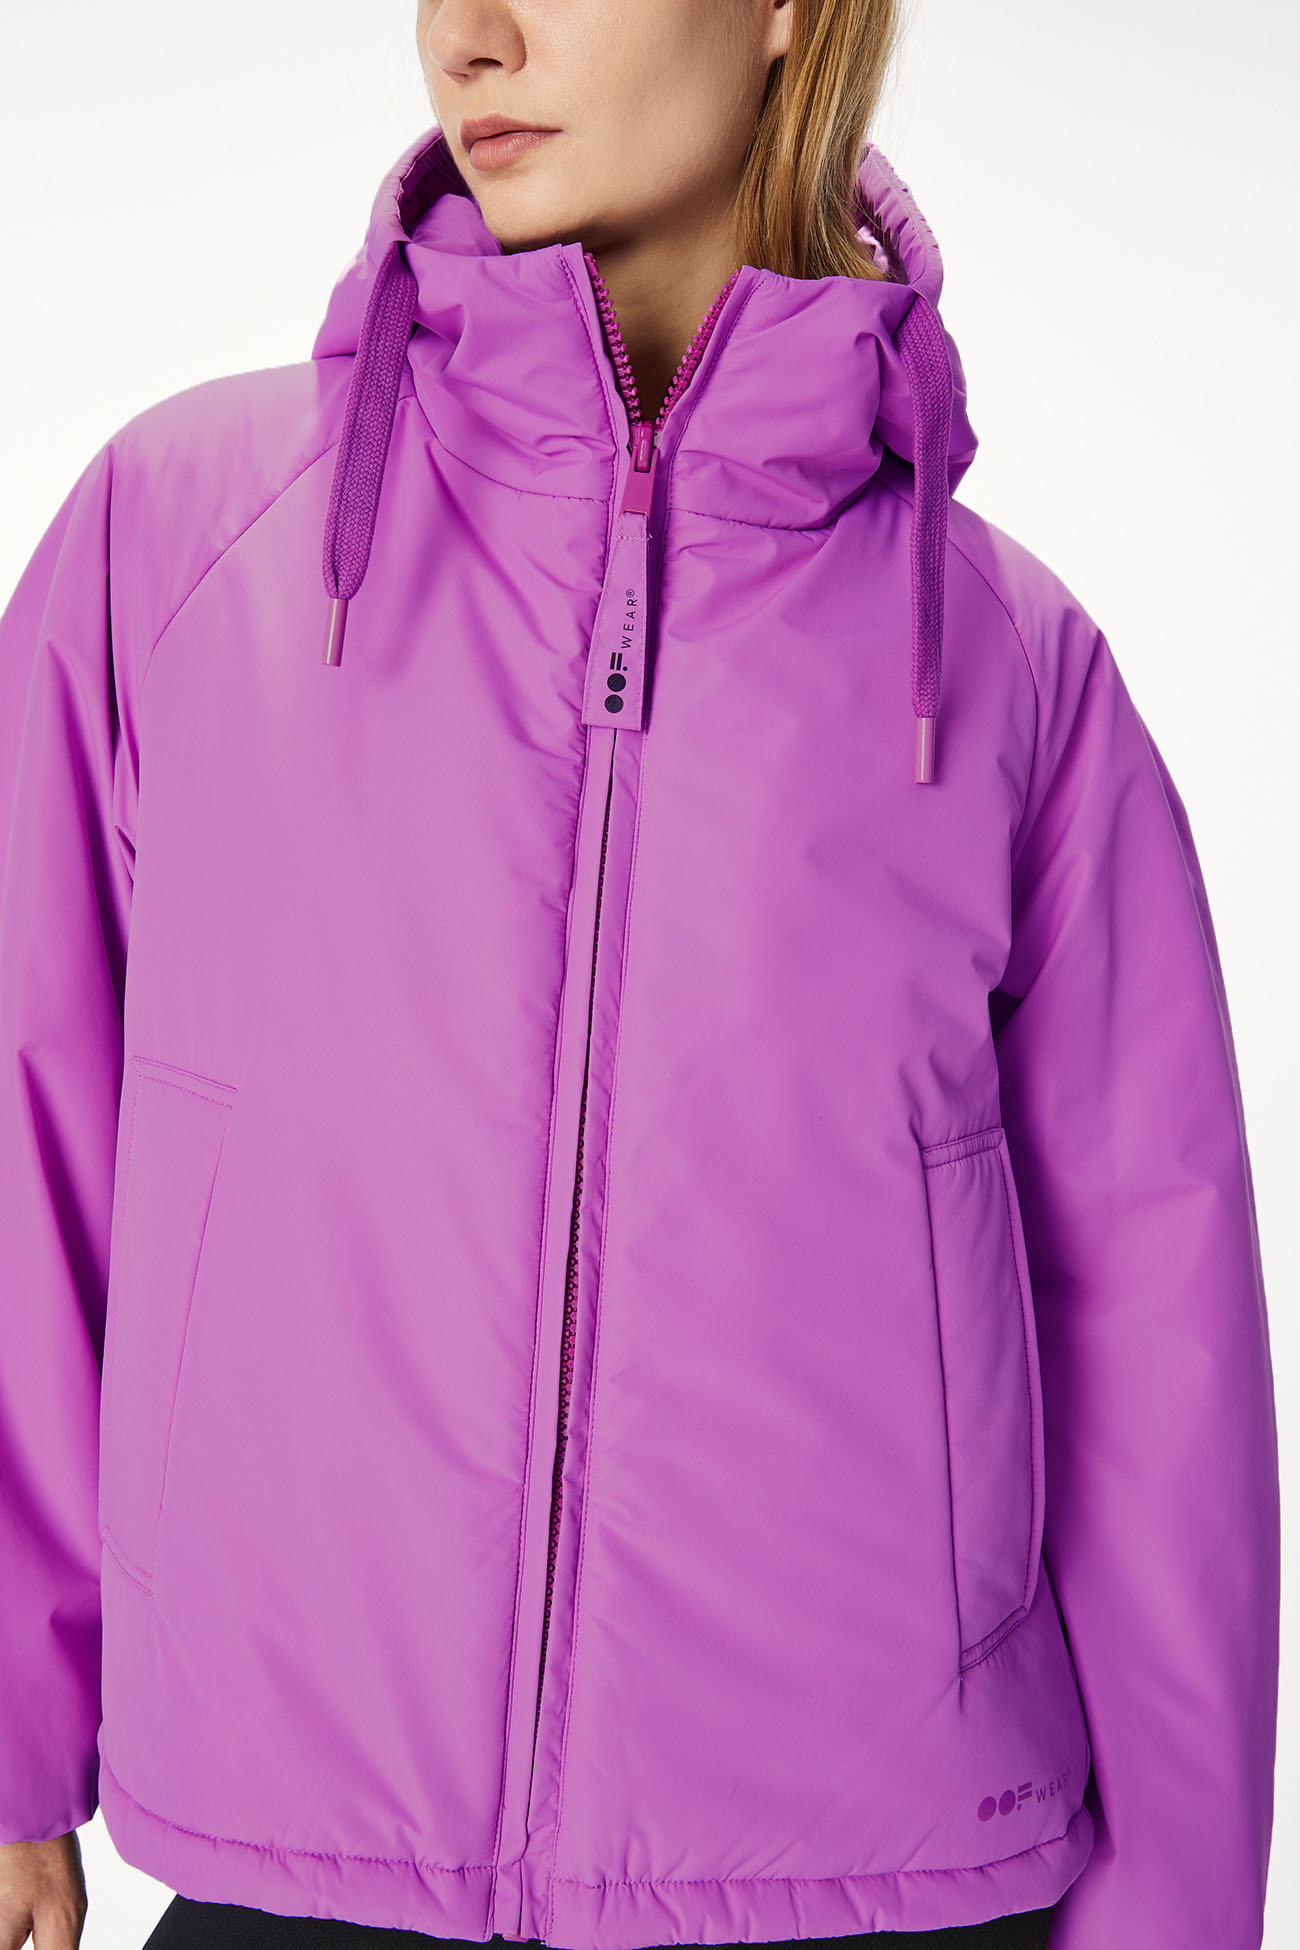 JACKET 9750 MADE IN NYLON - ORCHID - OOF WEAR